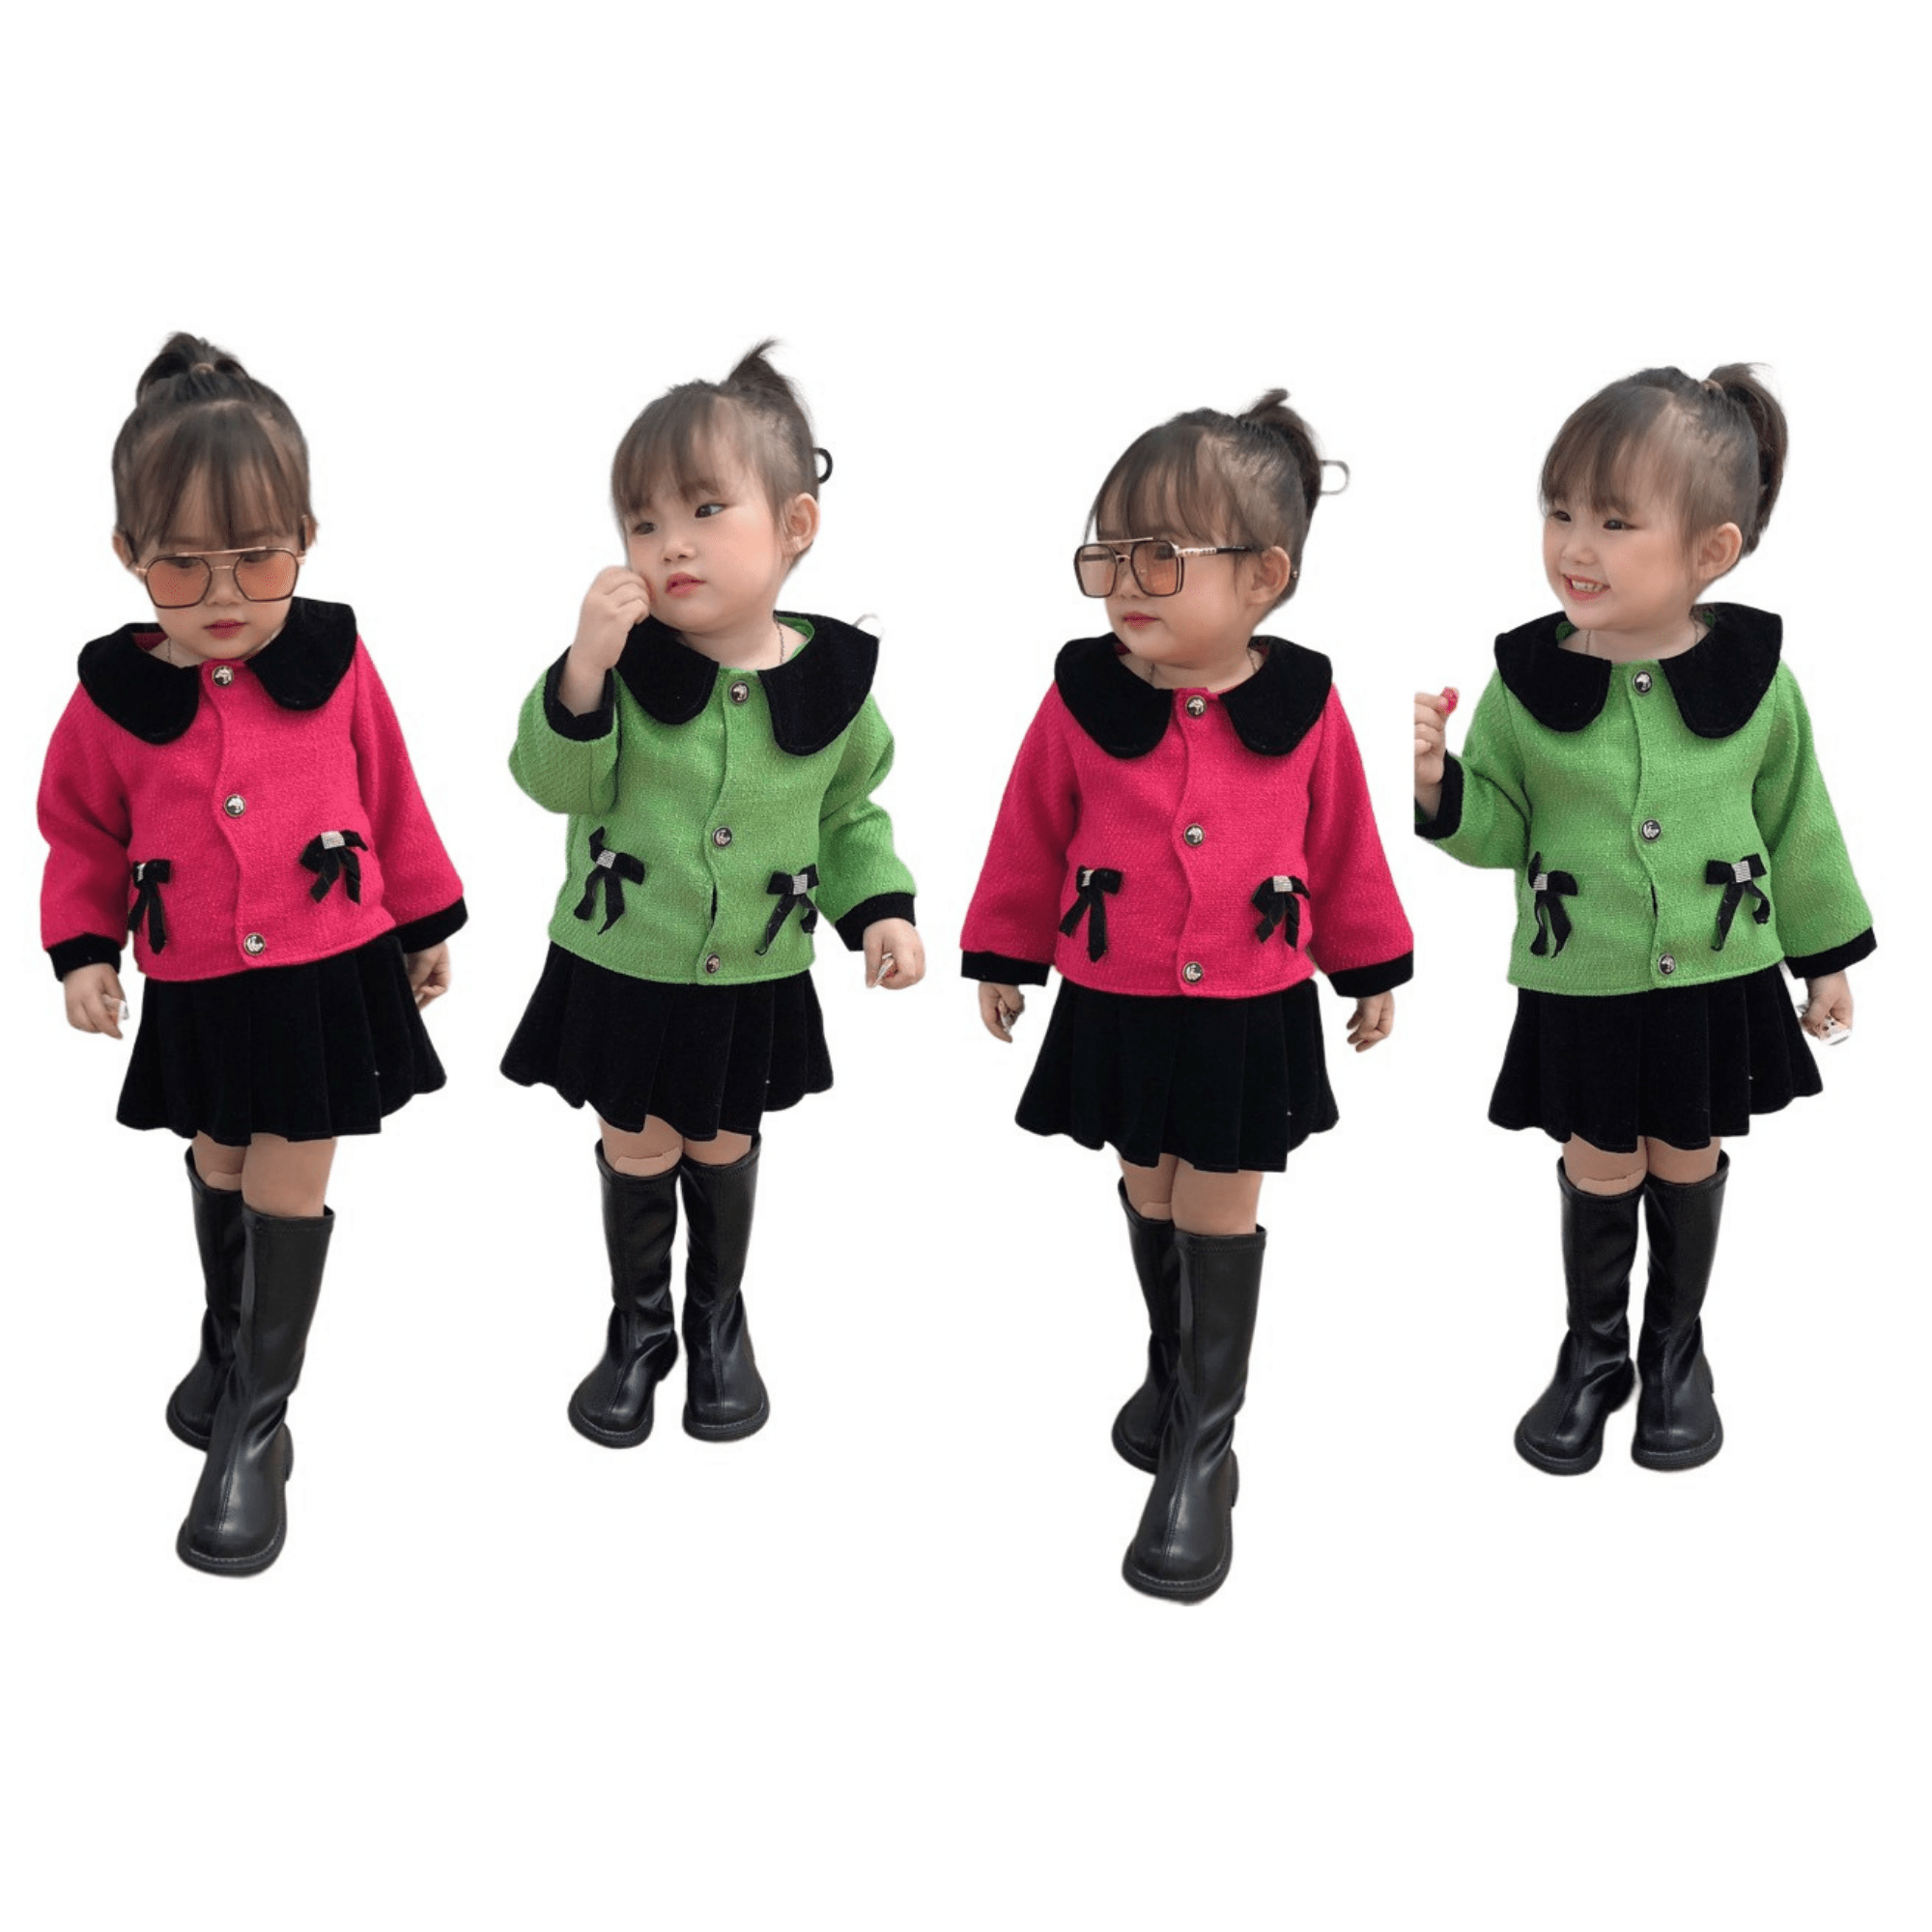 Wholesale Kids Clothes Customized Service Natural Dresses New Arrival Each One In Opp Bag From Vietnam Manufacturer 3